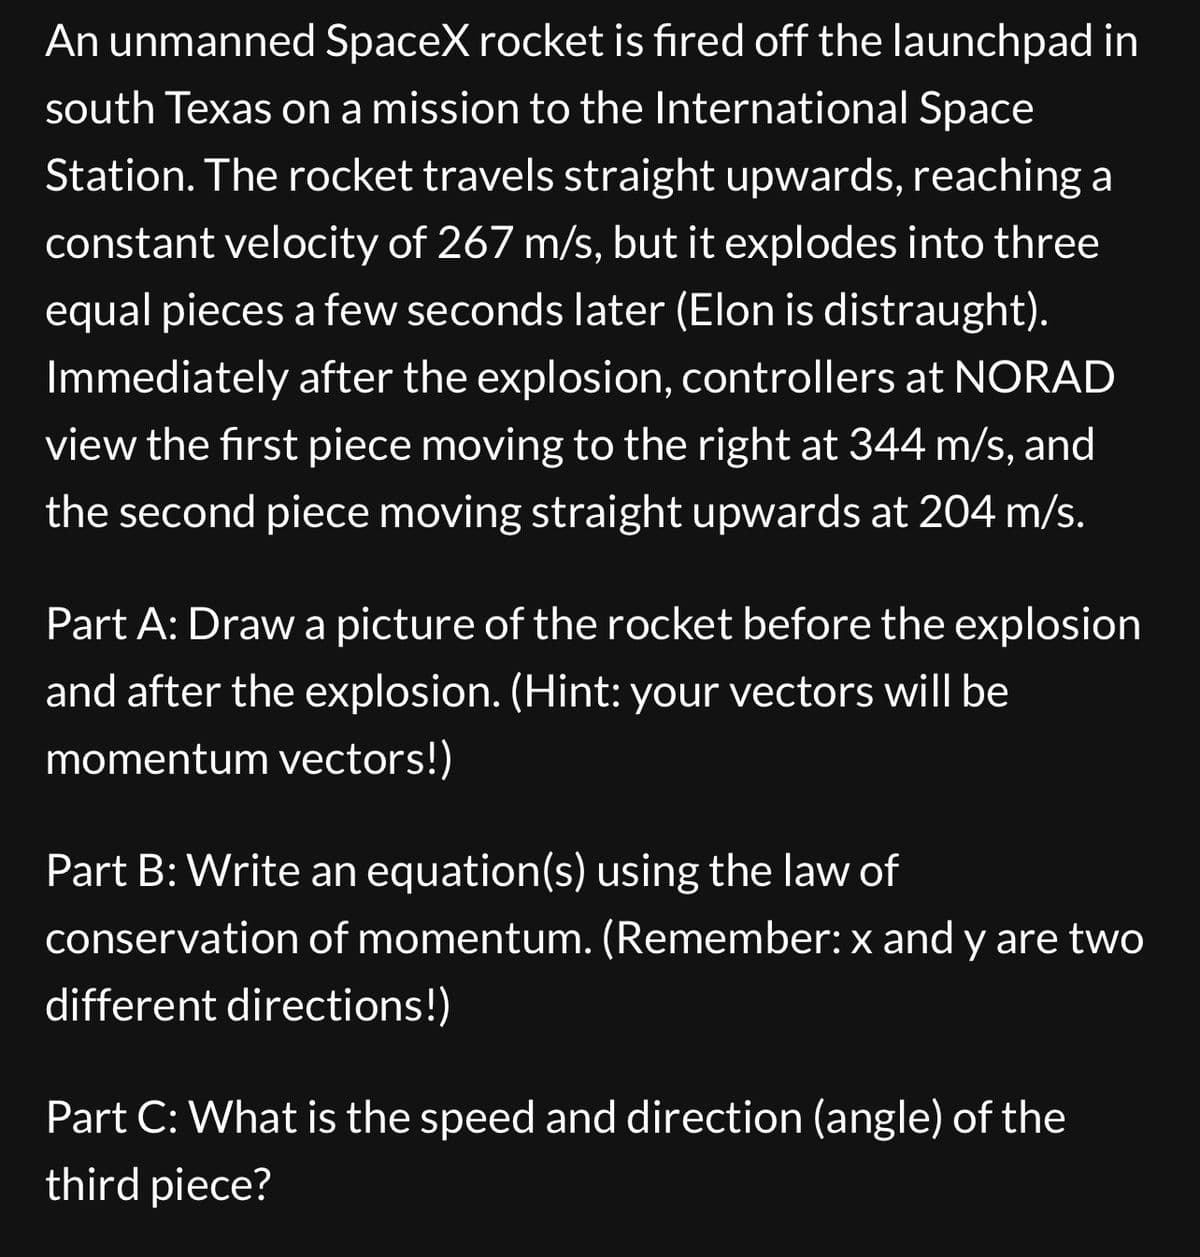 An unmanned SpaceX rocket is fired off the launchpad in
south Texas on a mission to the International Space
Station. The rocket travels straight upwards, reaching a
constant velocity of 267 m/s, but it explodes into three
equal pieces a few seconds later (Elon is distraught).
Immediately after the explosion, controllers at NORAD
view the first piece moving to the right at 344 m/s, and
the second piece moving straight upwards at 204 m/s.
Part A: Draw a picture of the rocket before the explosion
and after the explosion. (Hint: your vectors will be
momentum vectors!)
Part B: Write an equation(s) using the law of
conservation of momentum. (Remember: x and y are two
different directions!)
Part C: What is the speed and direction (angle) of the
third piece?